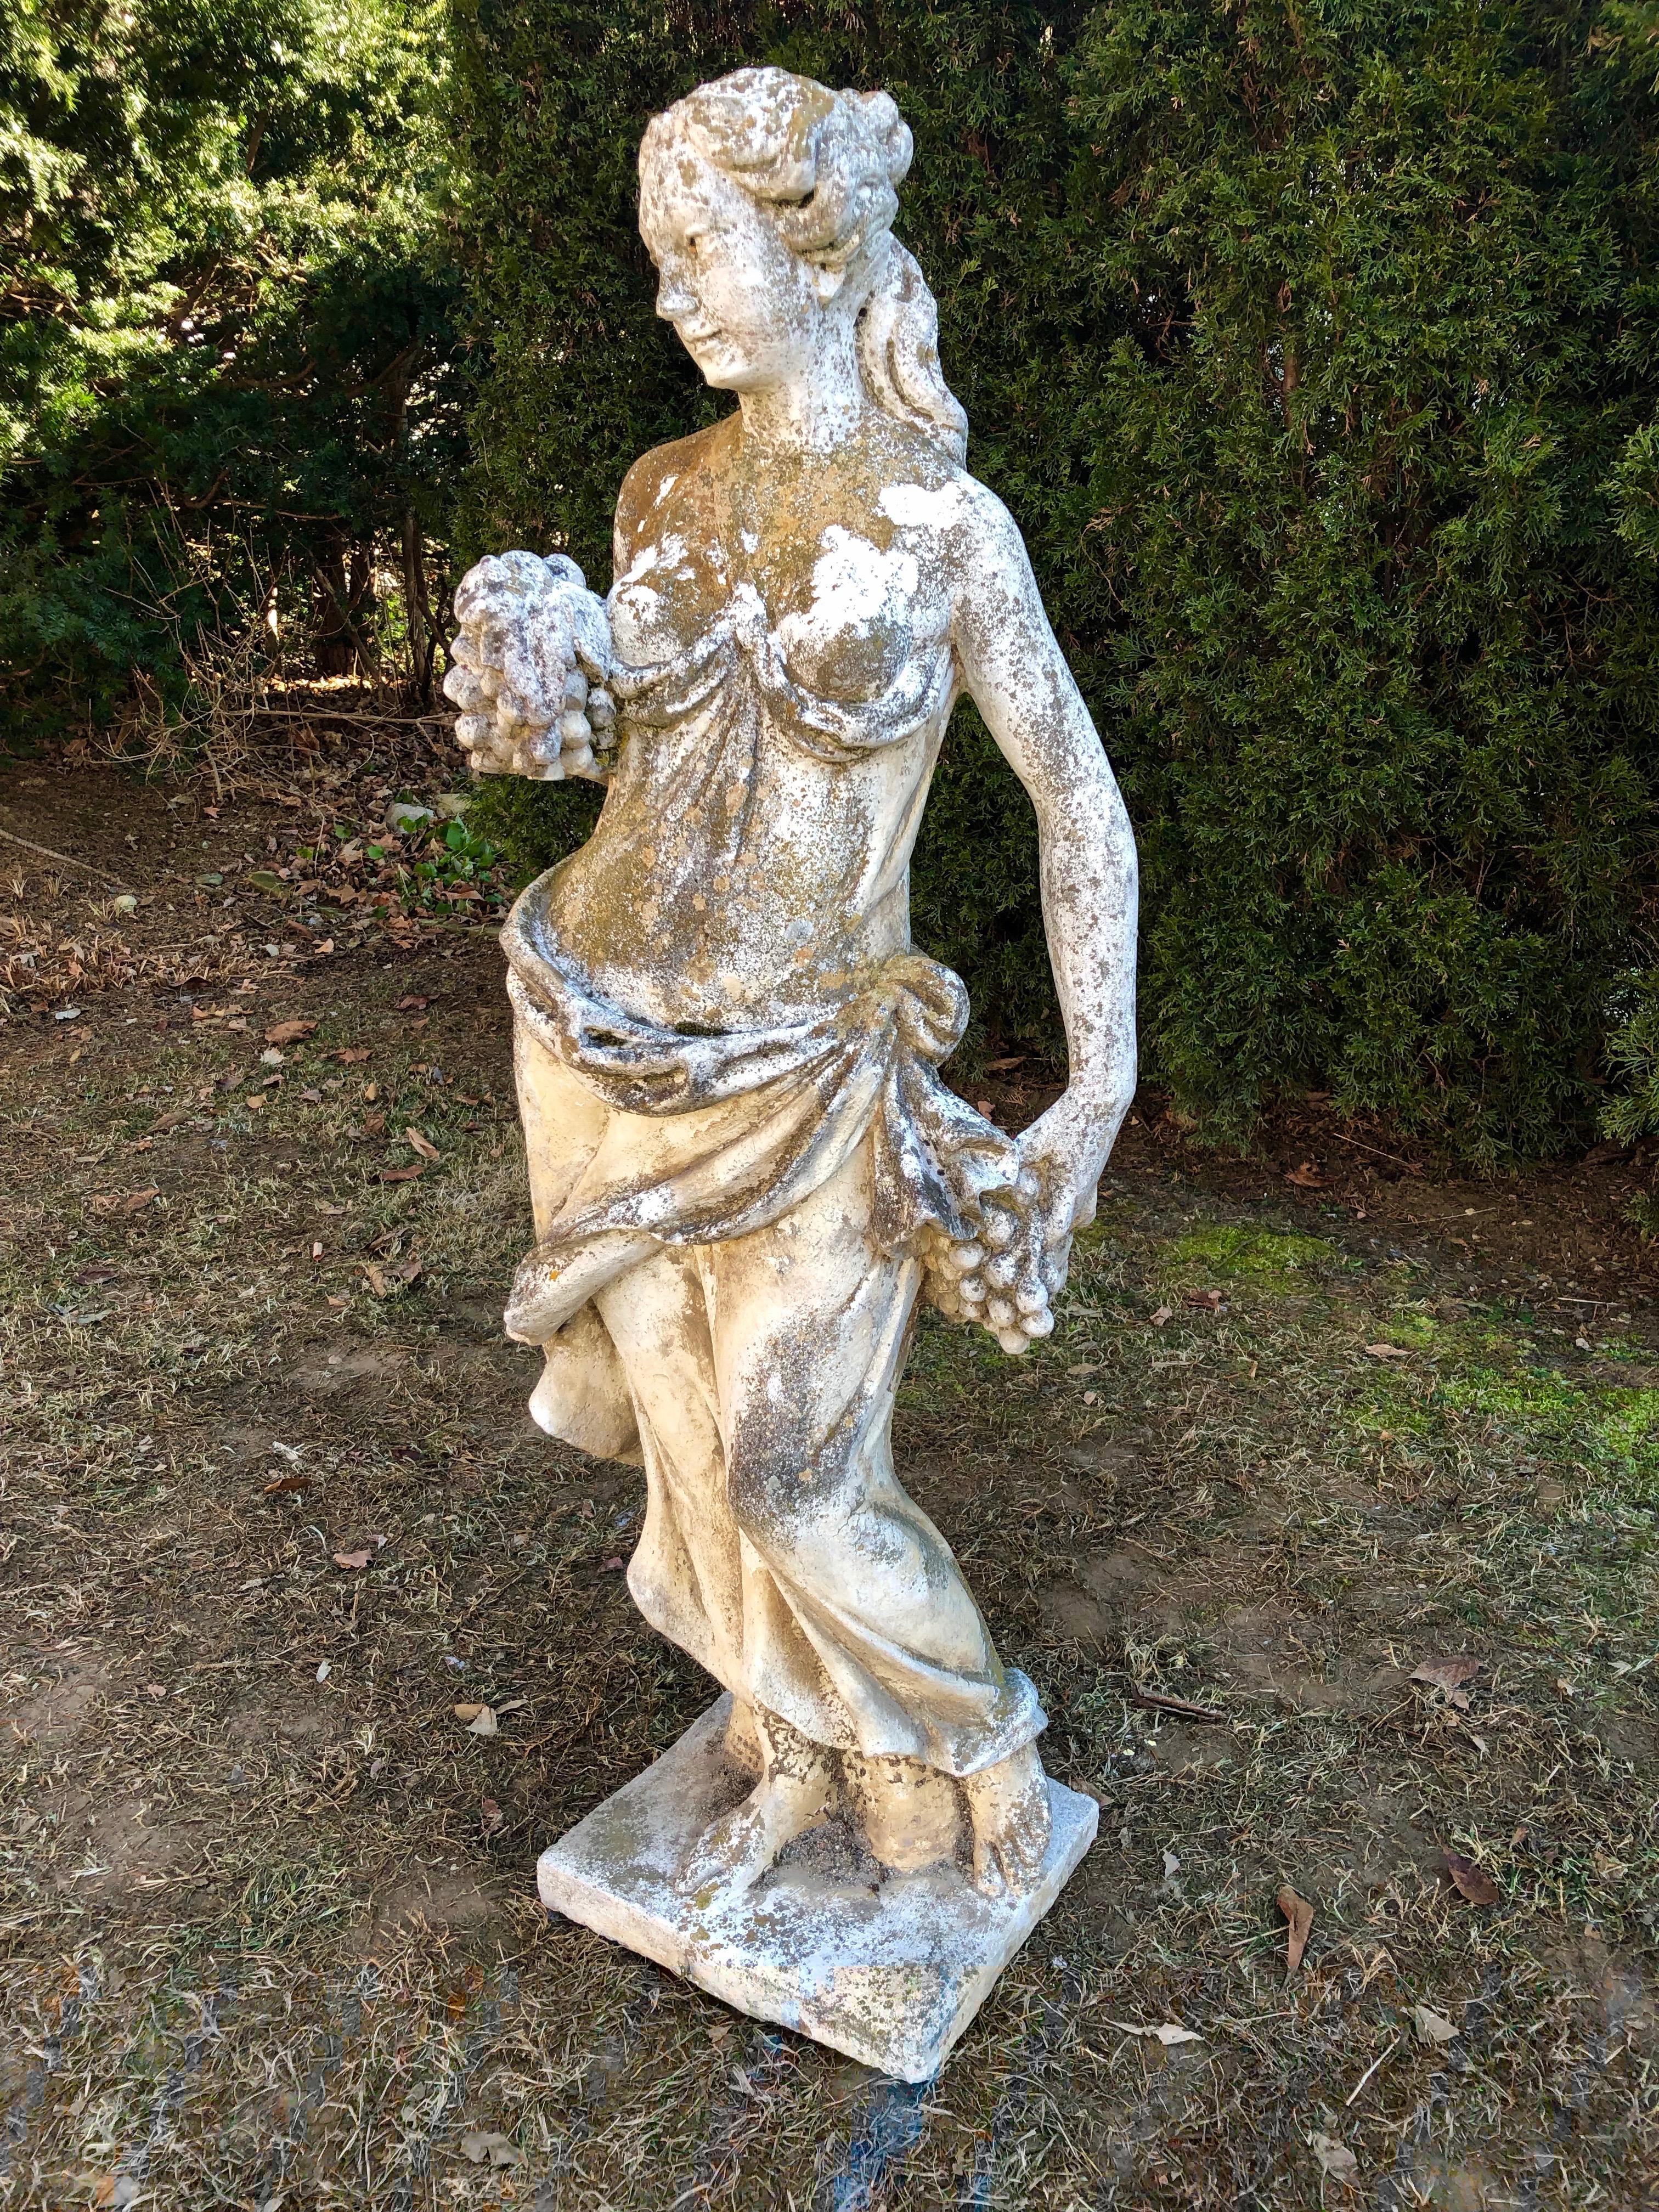 Classical statuary still has a place in the garden or home, and this figure of Autumn is stunning. With a gorgeous weathered patina, heavy yellow lichen, and a small amount of moss, she is posed holding a cluster of grapes across her chest and